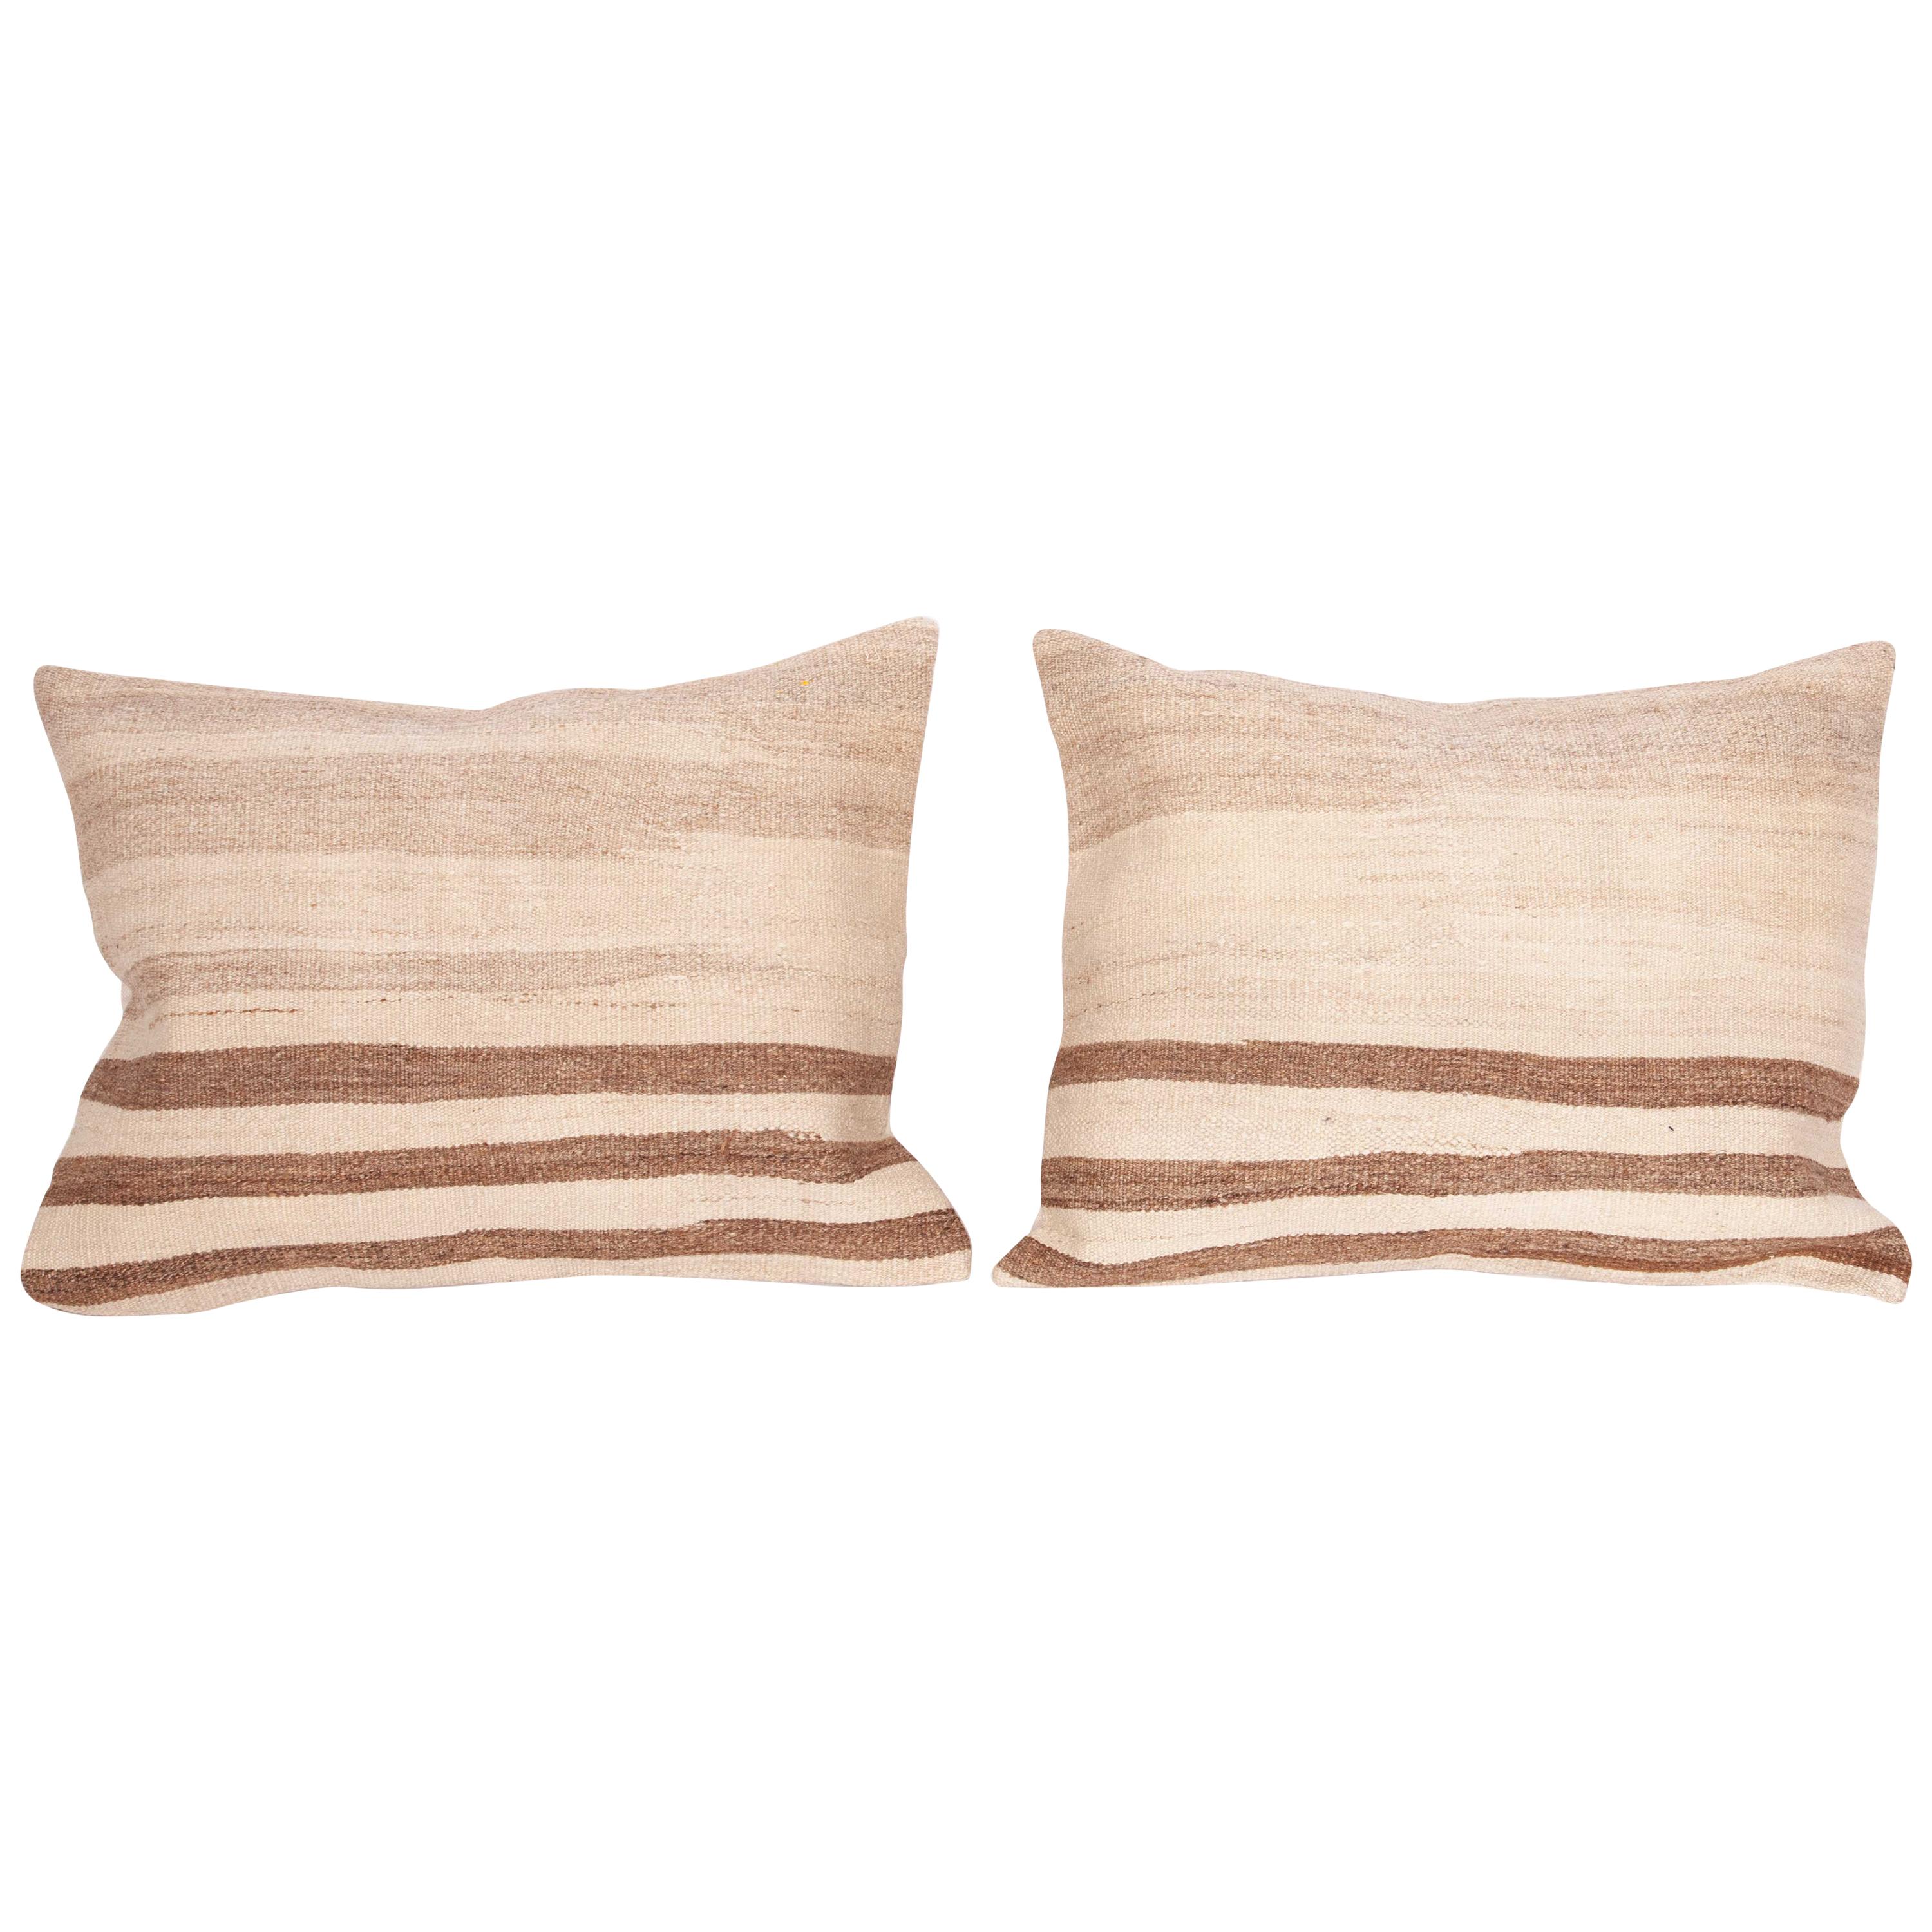 Pillow Cases Fashioned from a Mid-20th Century Anatolian Neutral Kilim